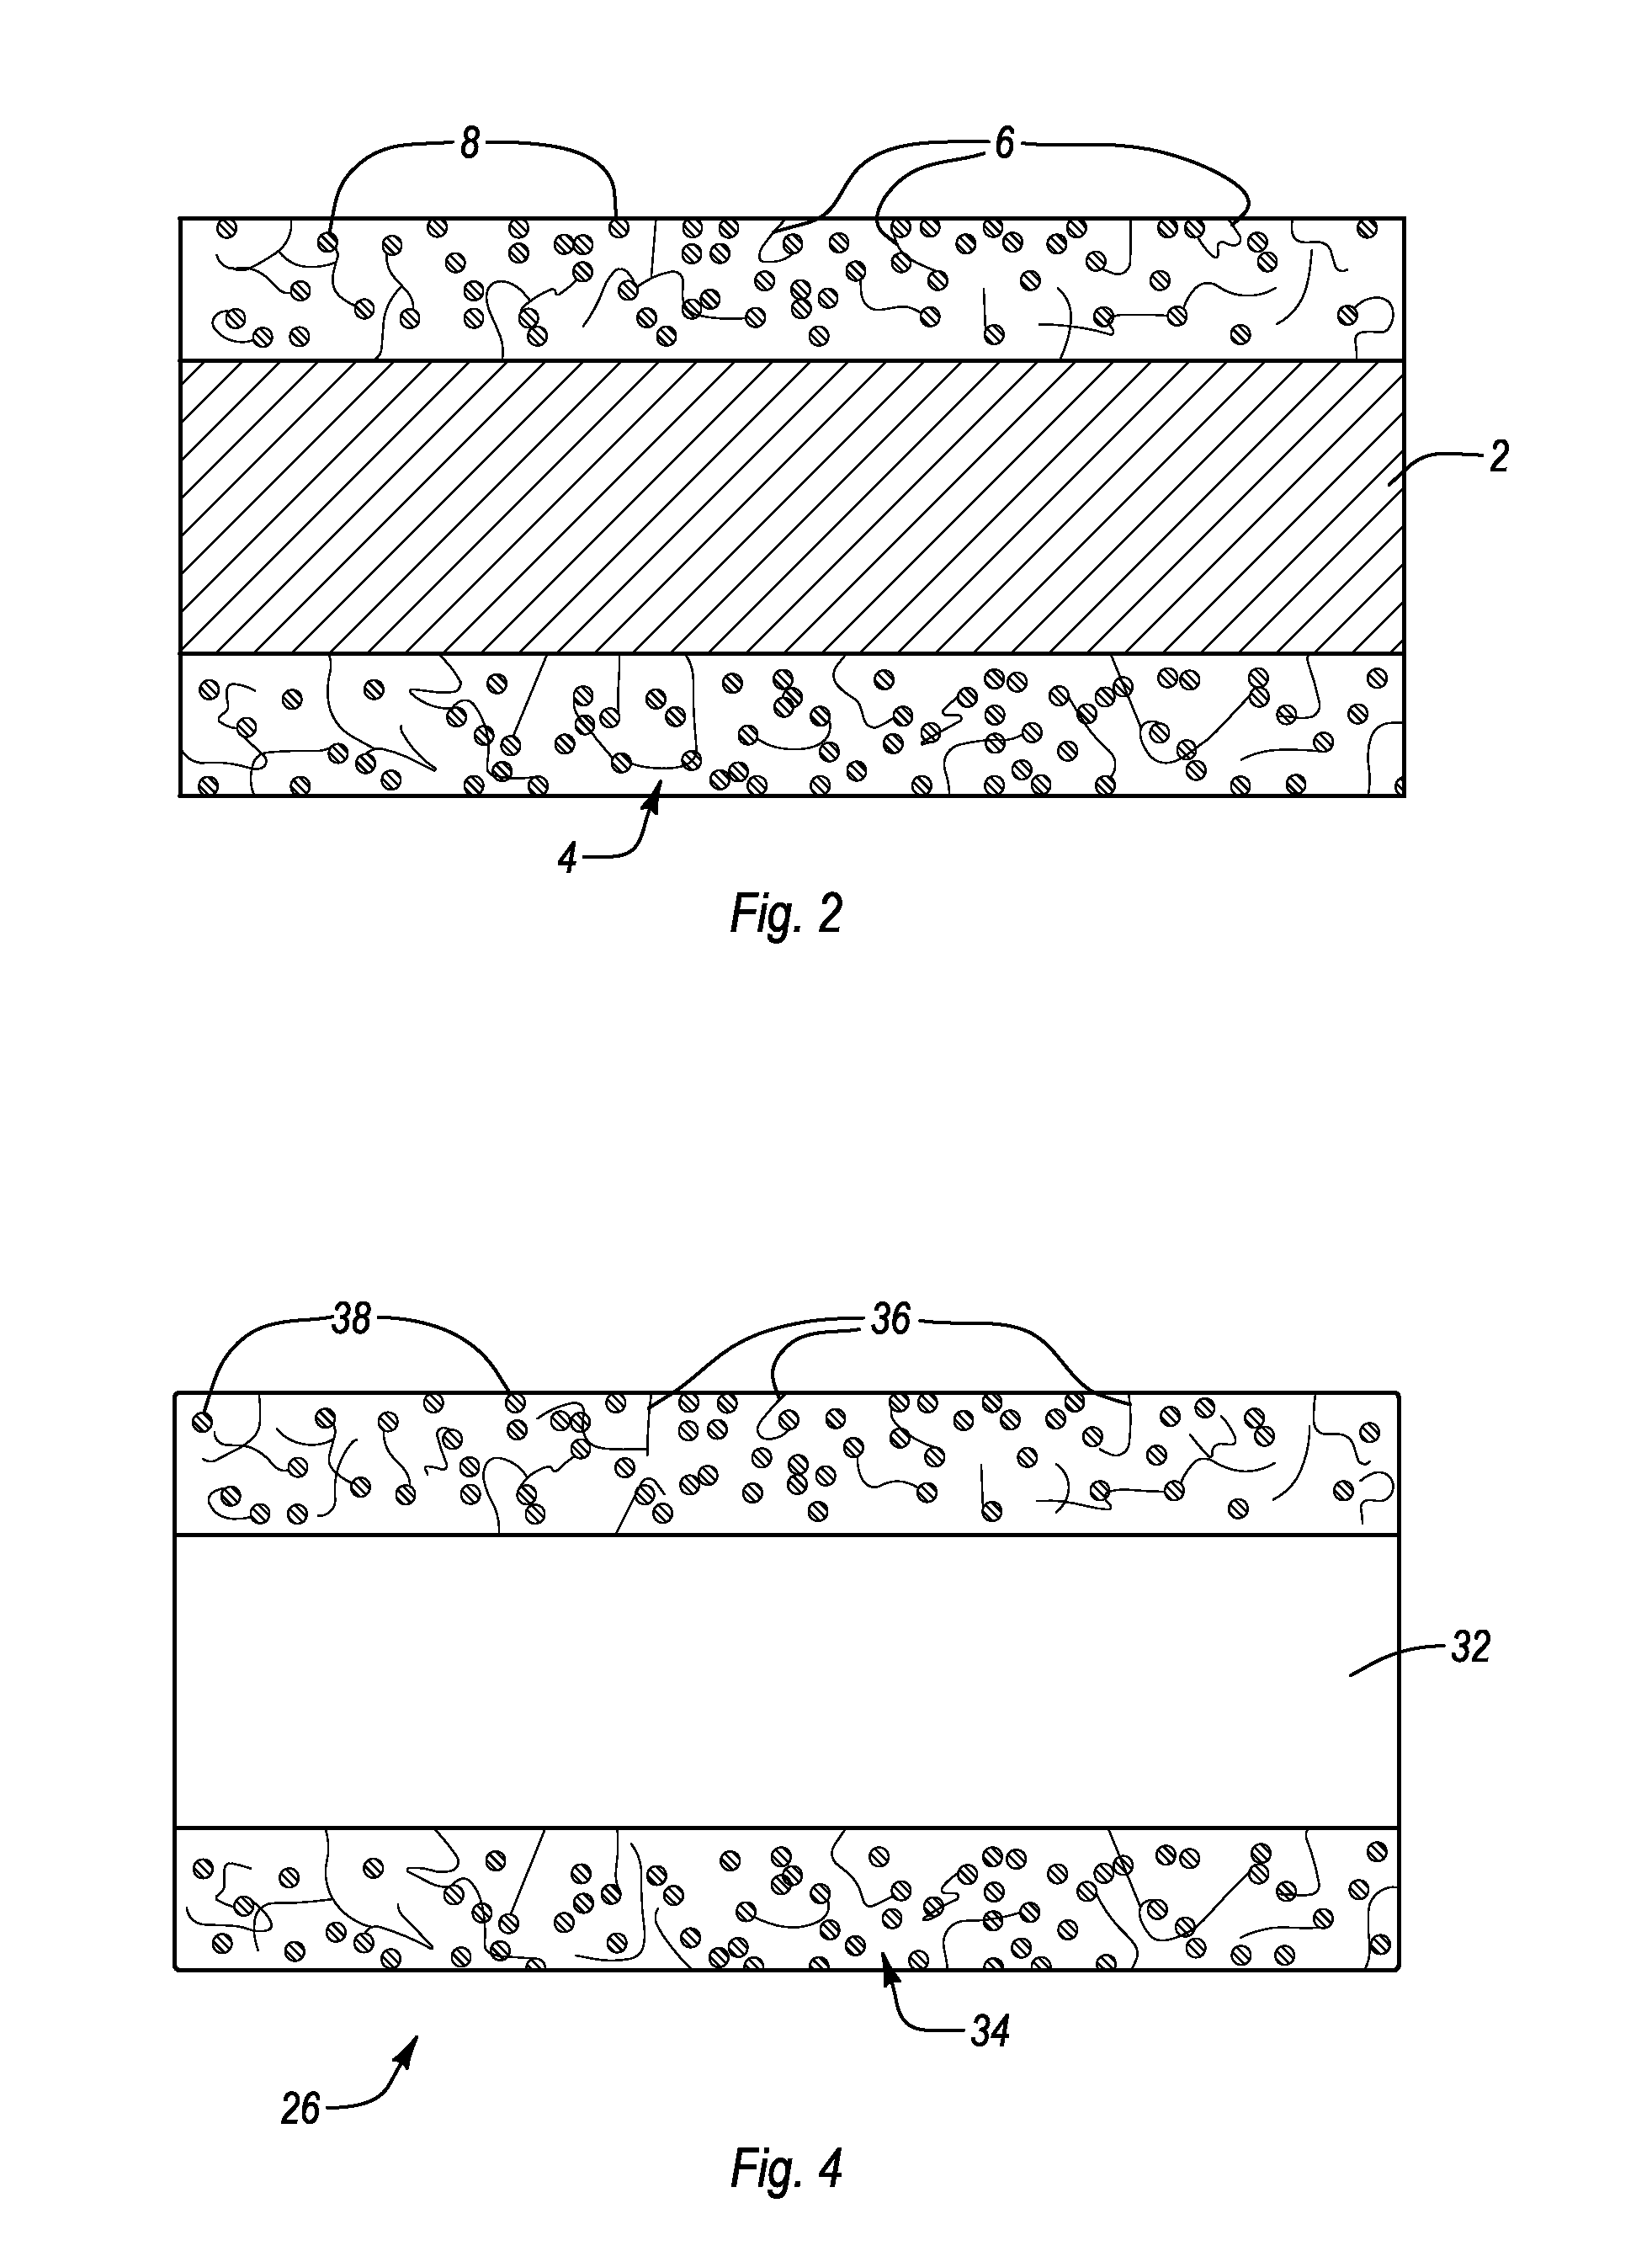 Methods of forming and using fiber-containing diamond-impregnated cutting tools